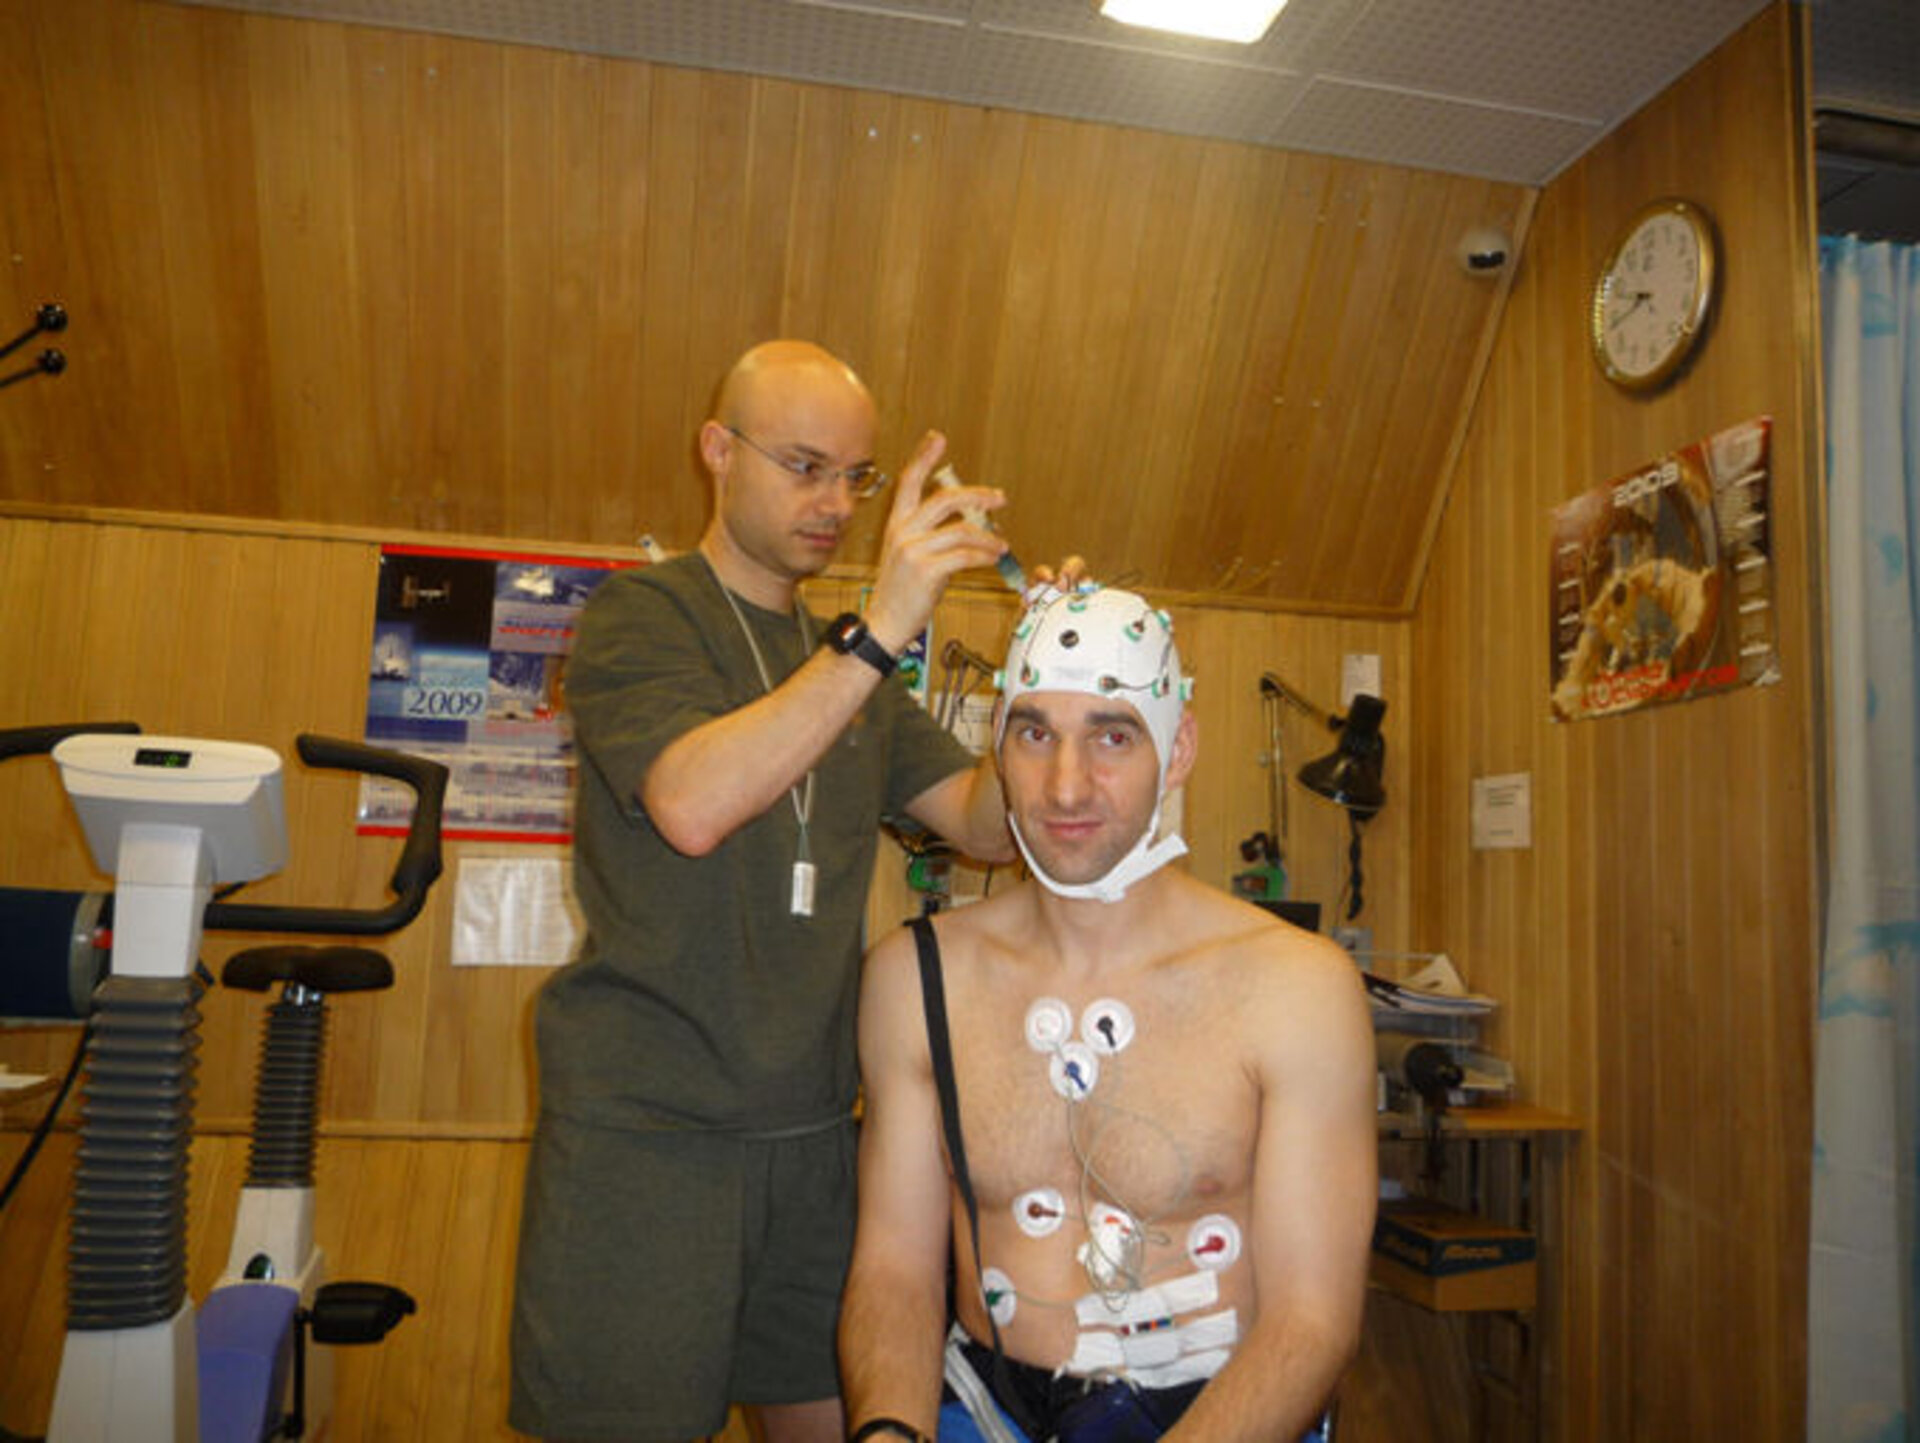 Cyrille preparing Oliver's EEG hat to measure his brainwaves before and after physical training